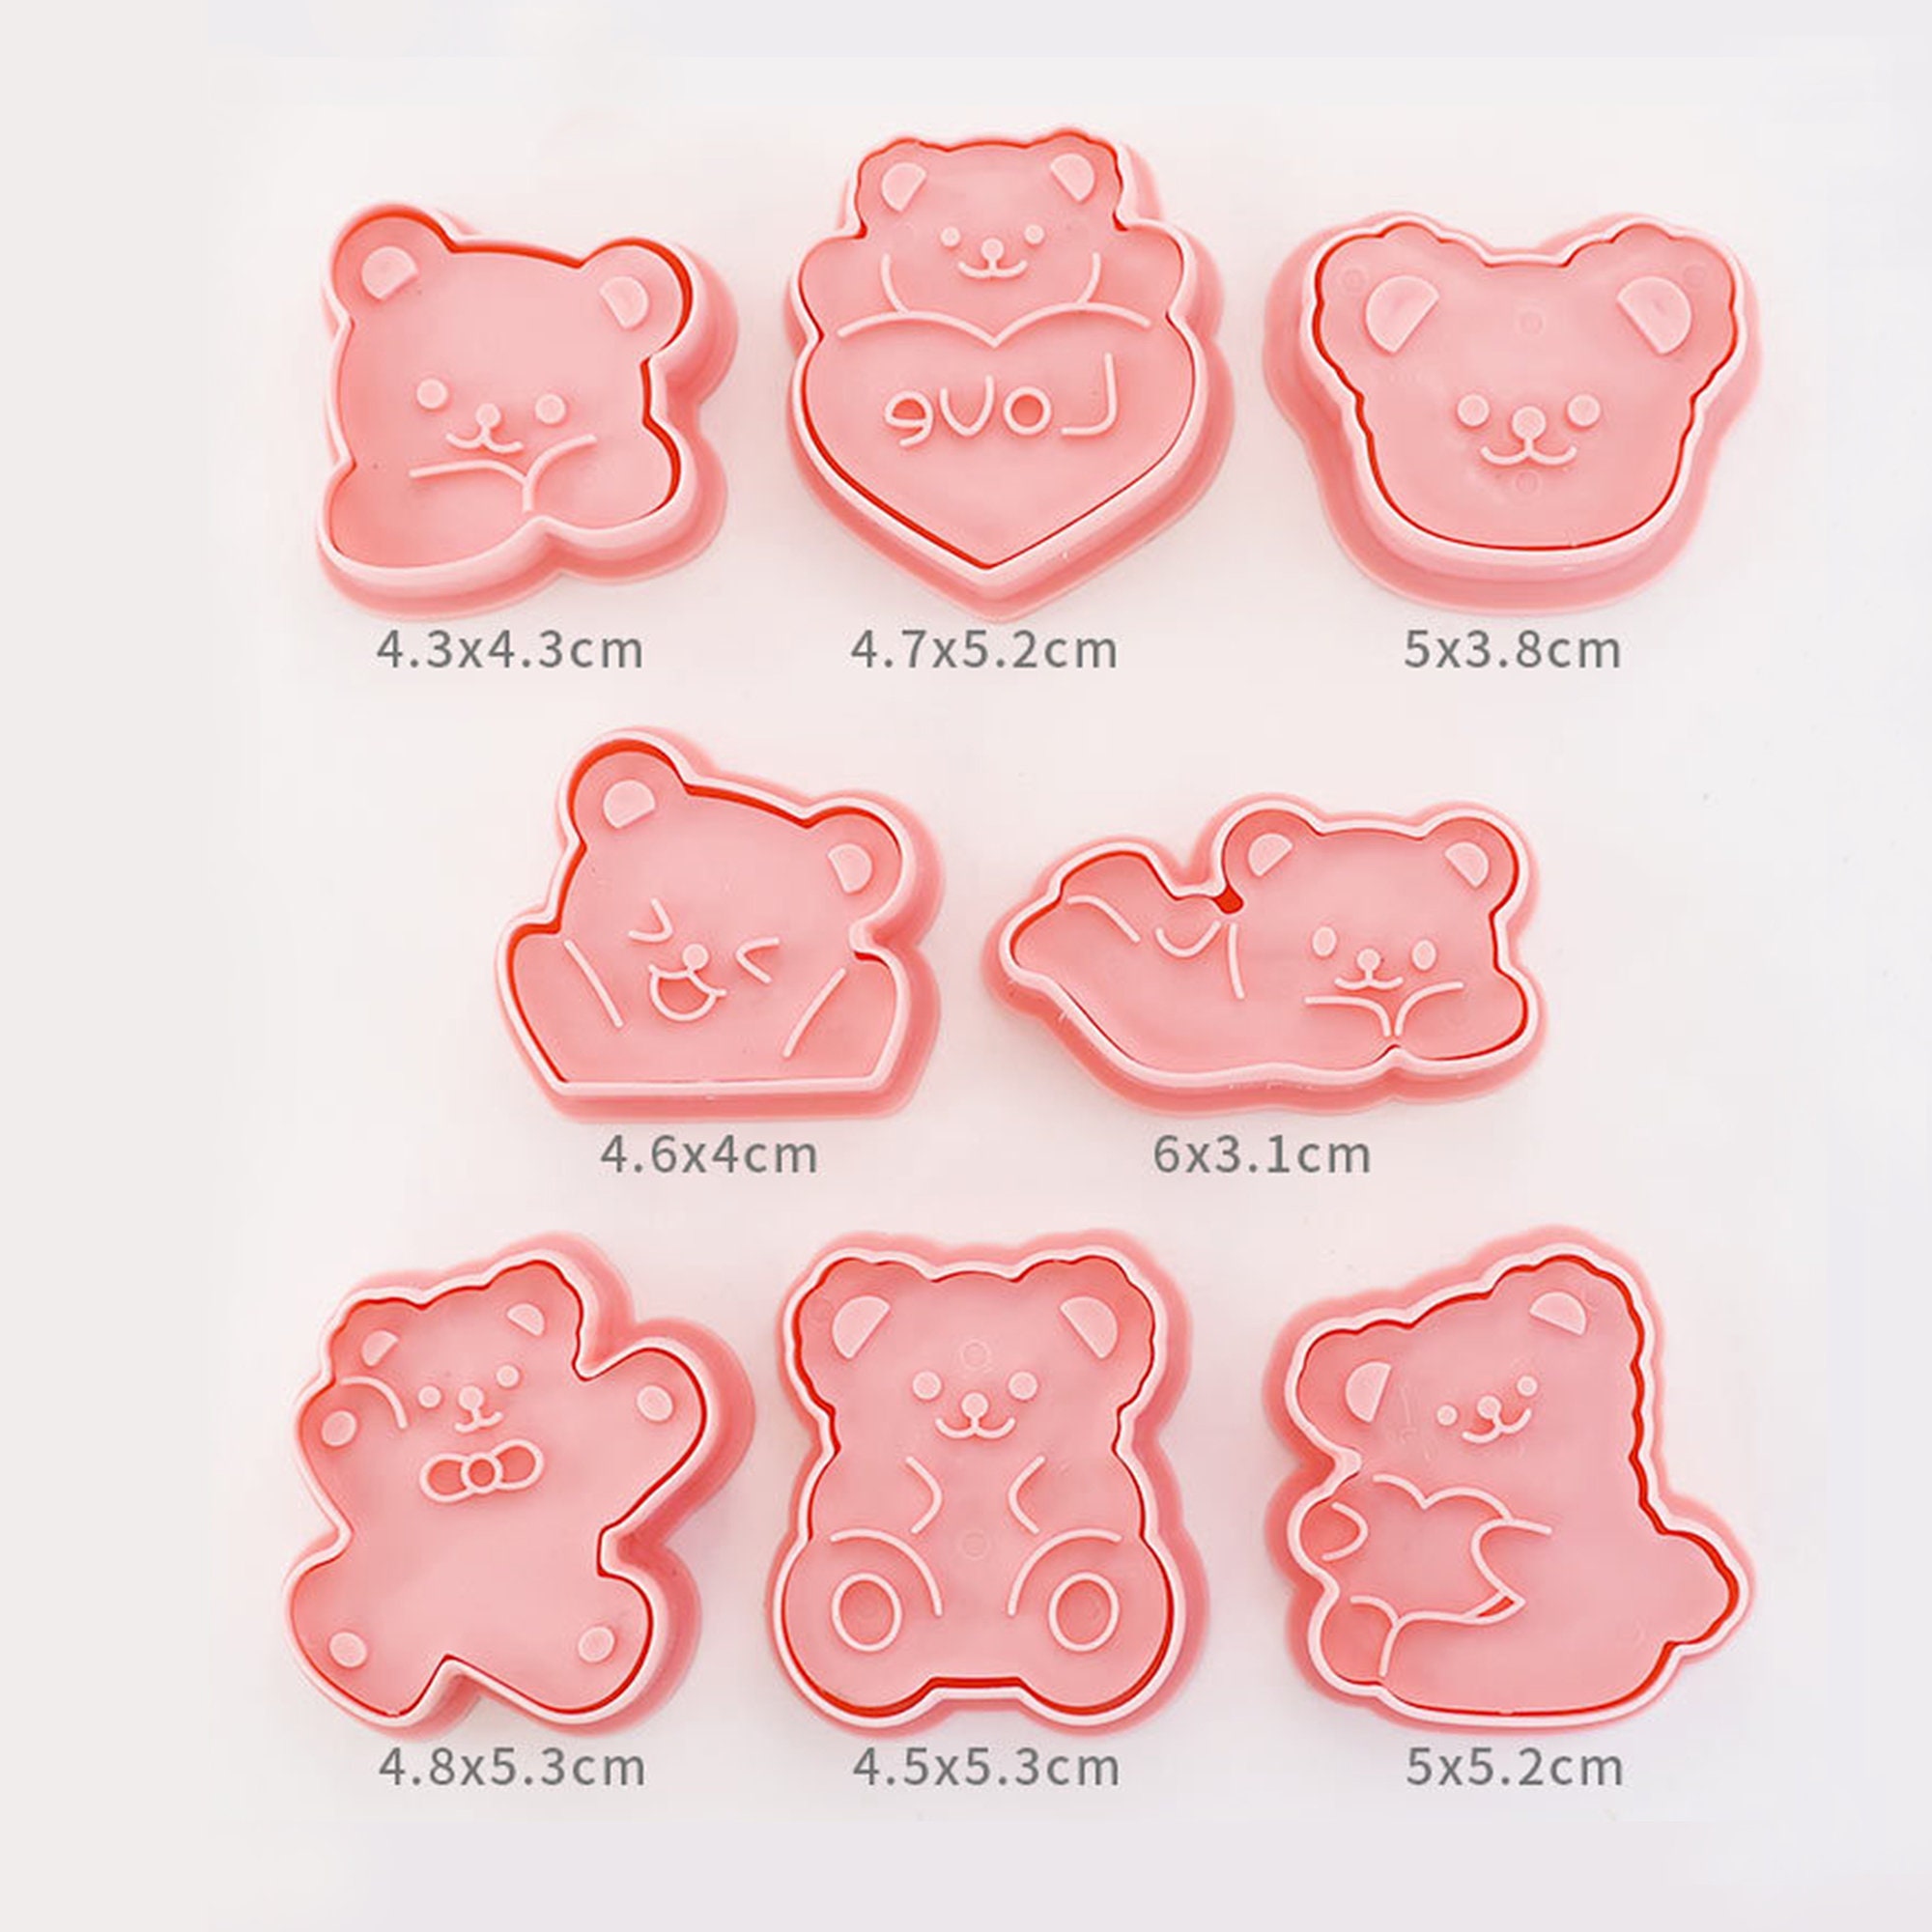 Bakell Stitched Teddy Bear Silicone Mold | 2.5x2 Inches, Pink